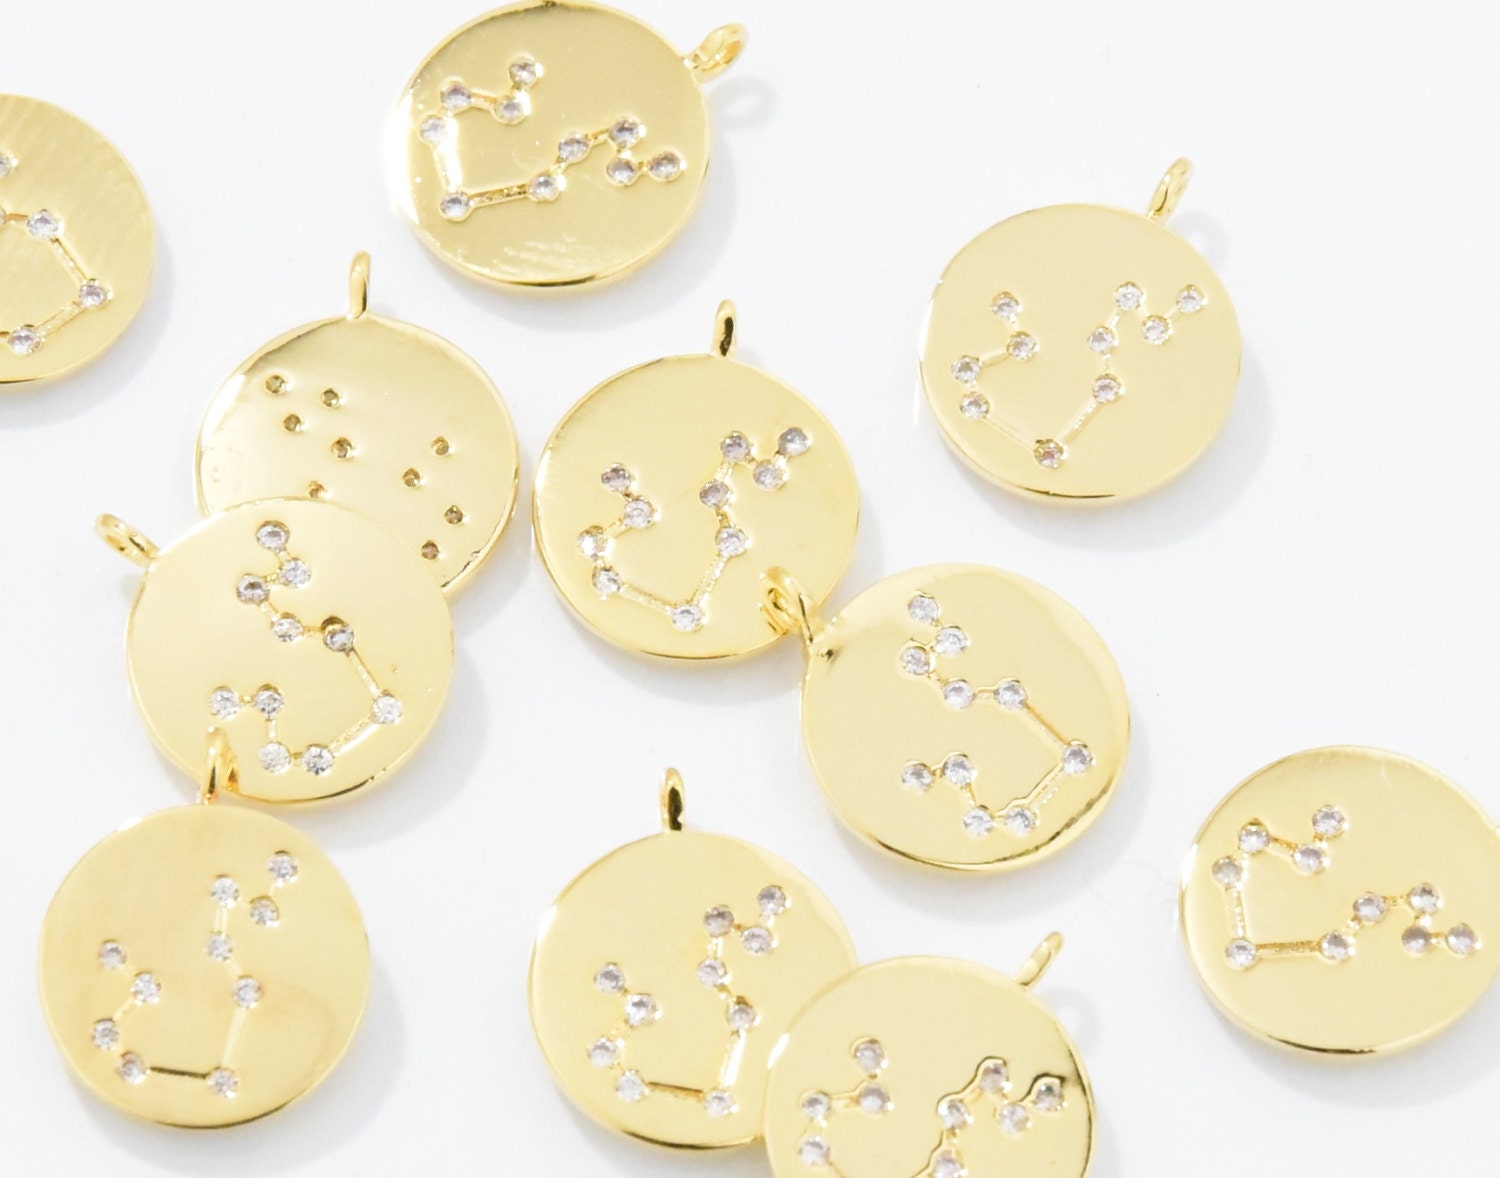 Aquarius . The Water Carrier Cubic Constellation Pendant Zodiac Sign 16K Polished Gold Plated Over Brass - 2Pcs/Ia0186-Pg